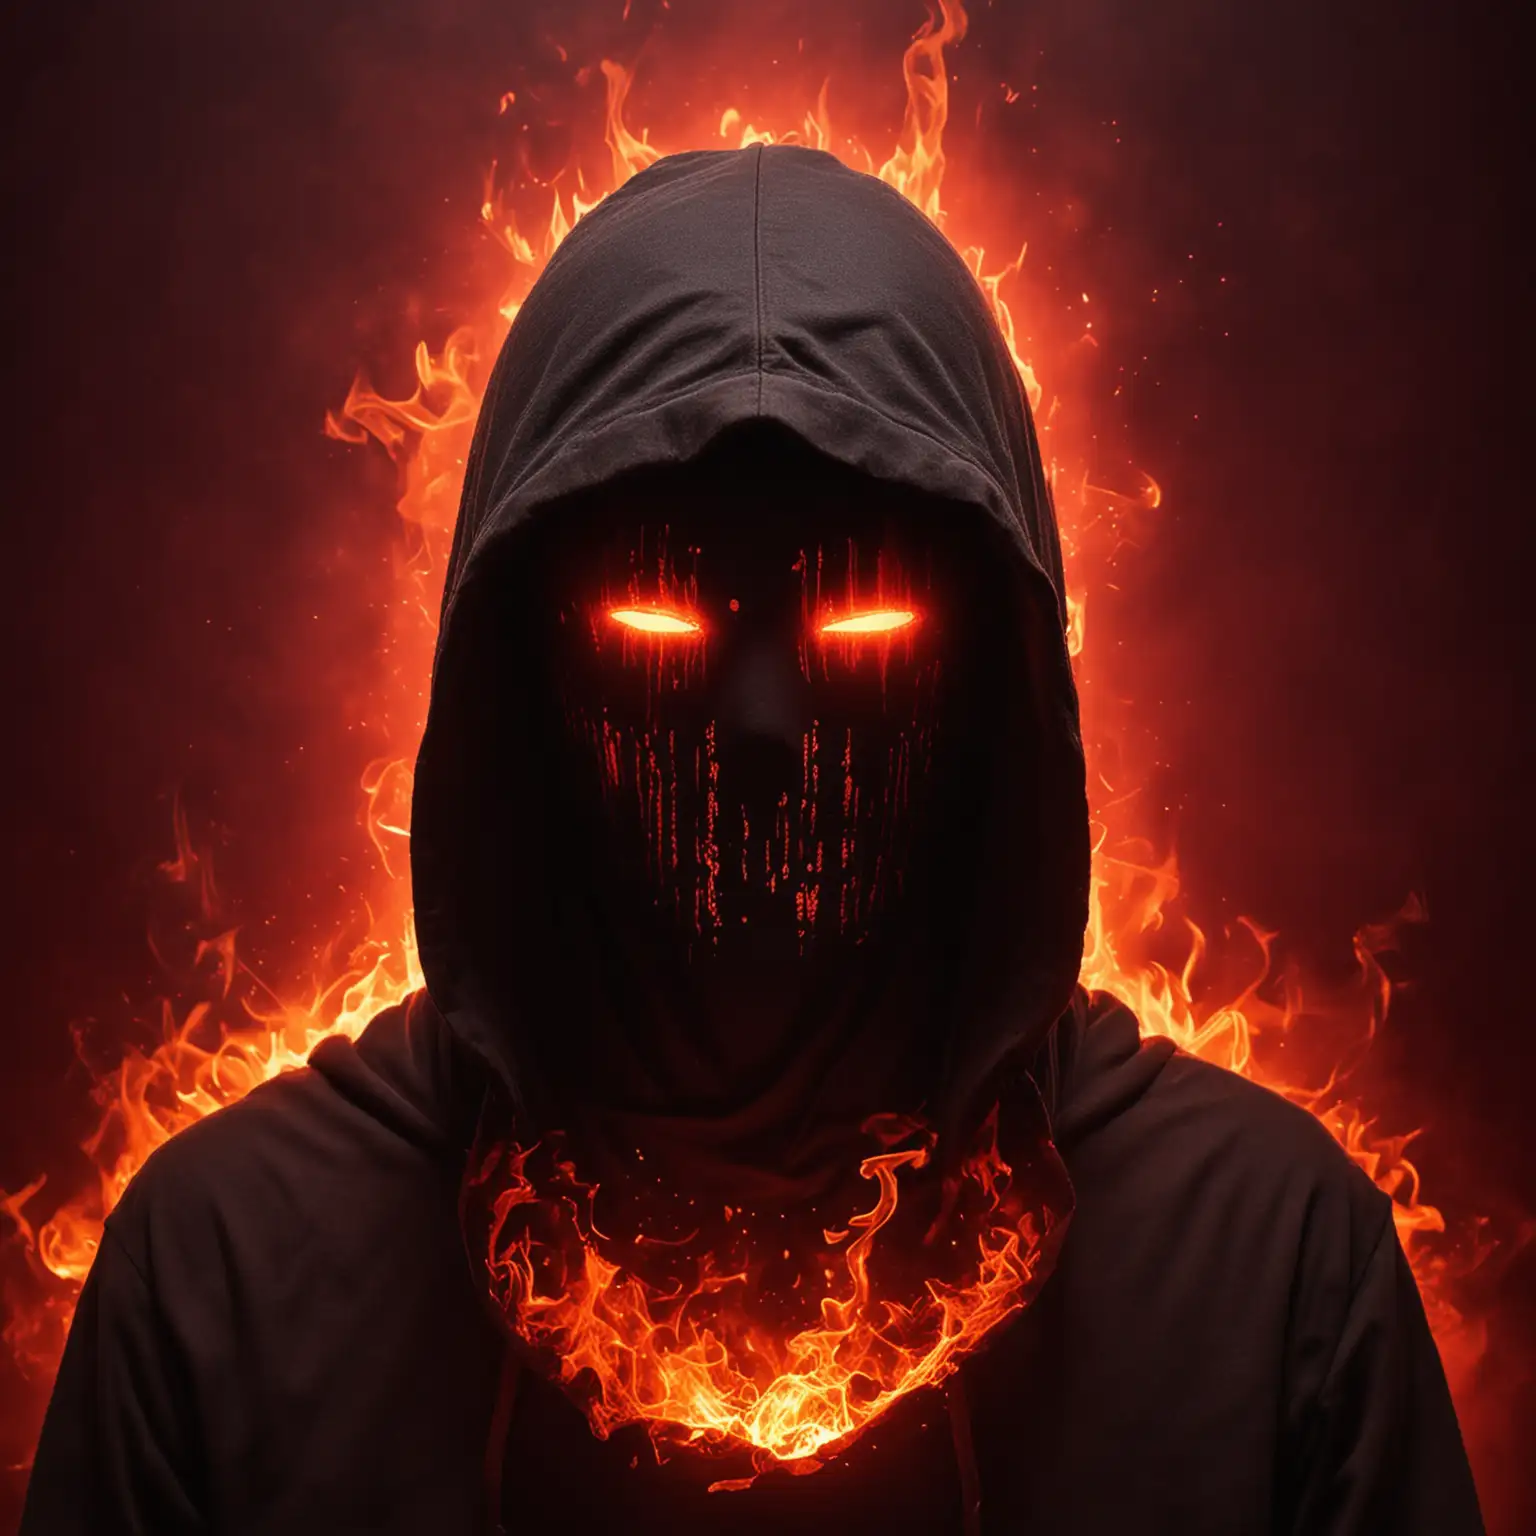 Mysterious Figure in Hood with Glowing Red on Fiery Background